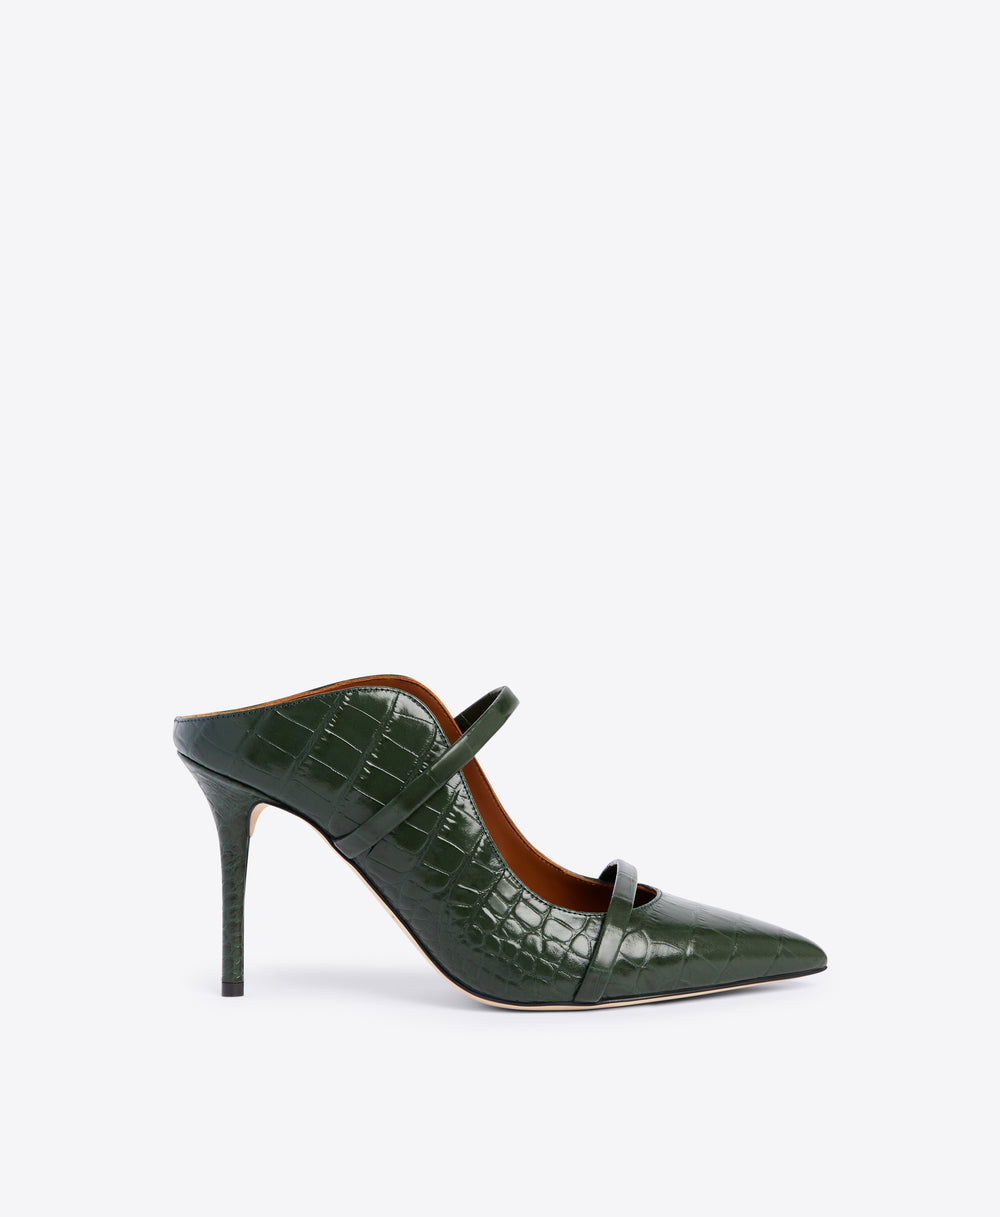 Double Strap Mules in Pine Green - Pointed Toe on Stiletto | Malone Souliers